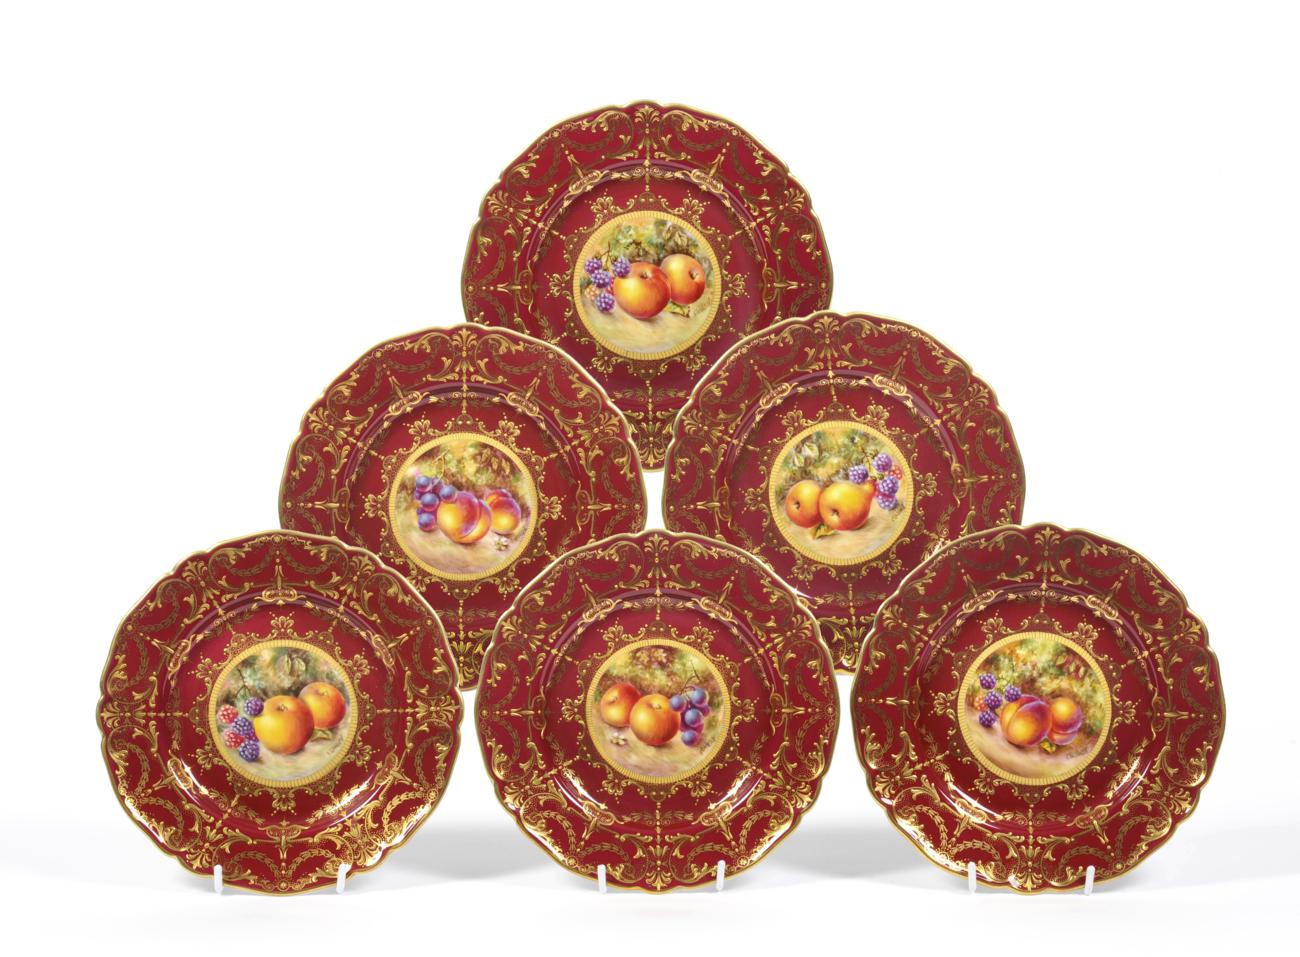 A Set of Six Royal Worcester Porcelain Cabinet Plates, 20th century, painted by Bowen with still